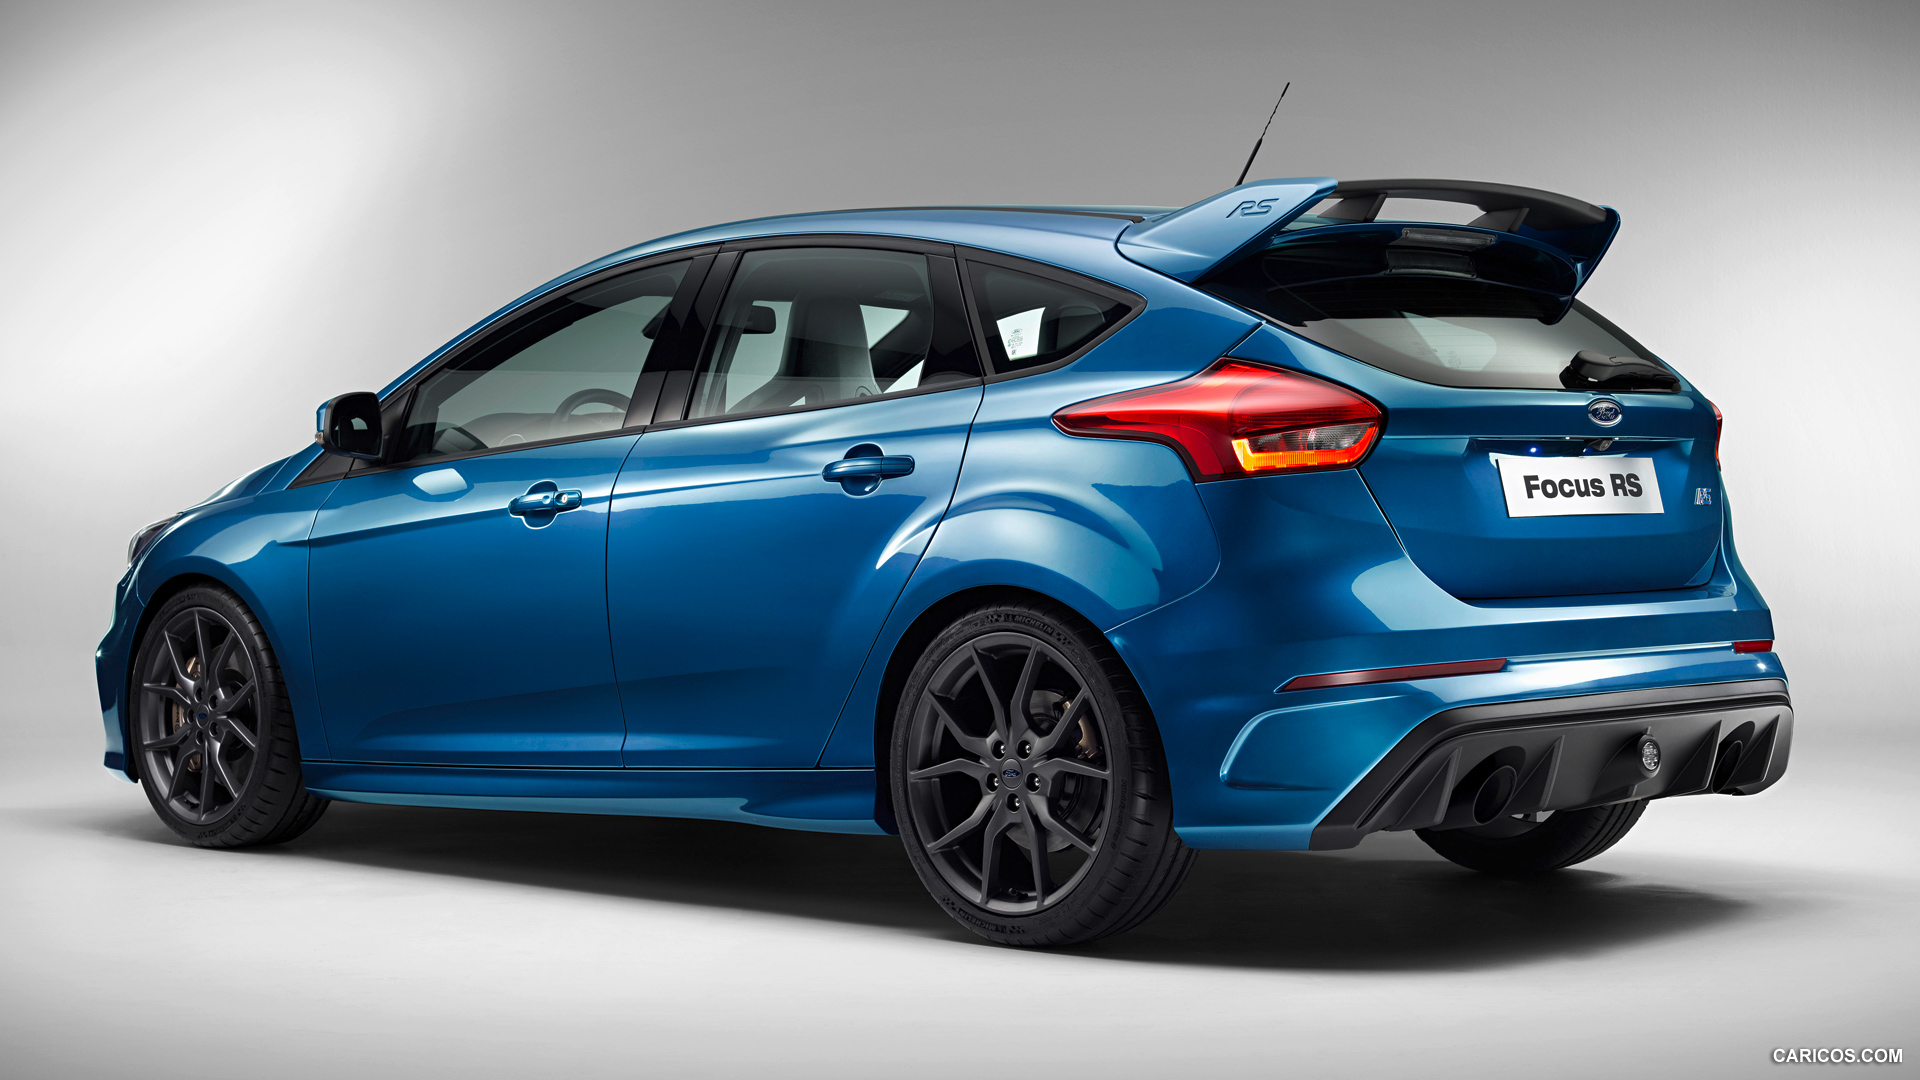 2017 Ford Focus Rs Hd Wallpaper Background Image 1920x1080